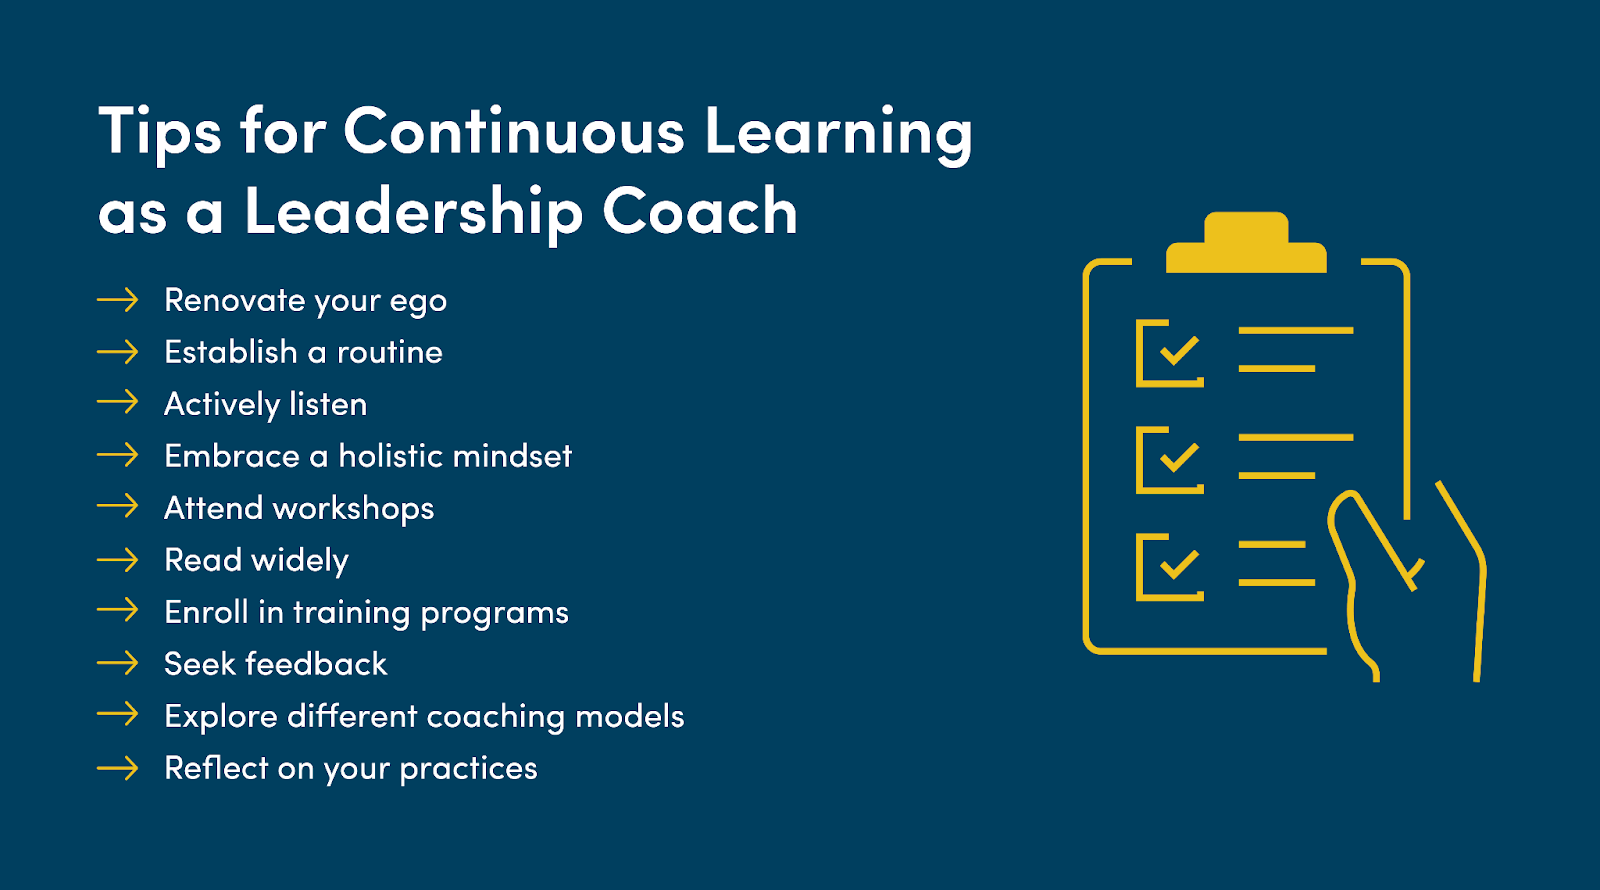 Tips for continuous learning as a leadership coach